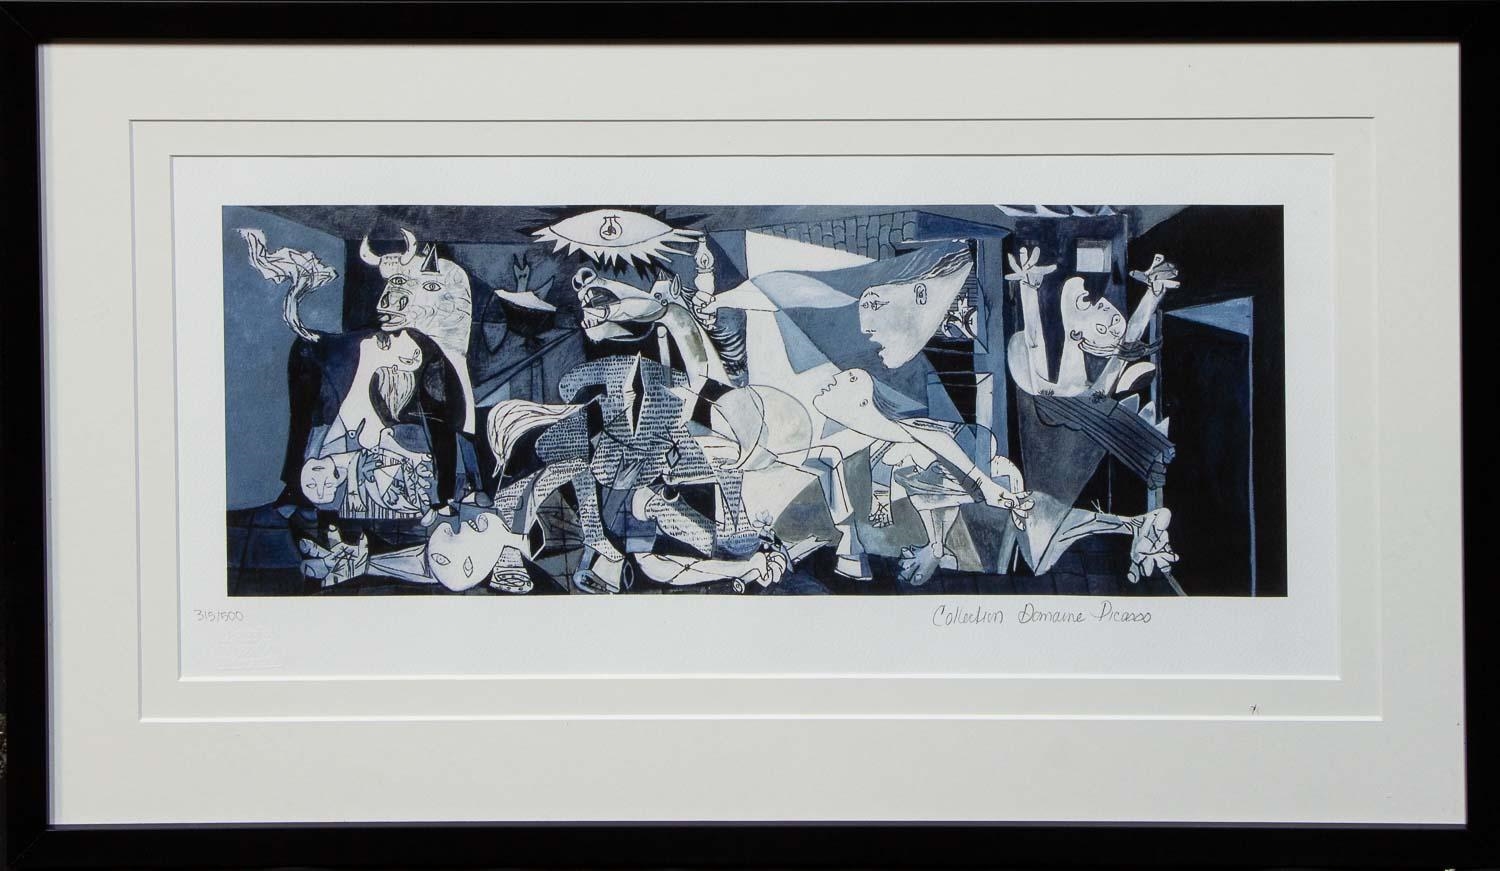 Artwork by Pablo Picasso, Guernica, Made of Giclee